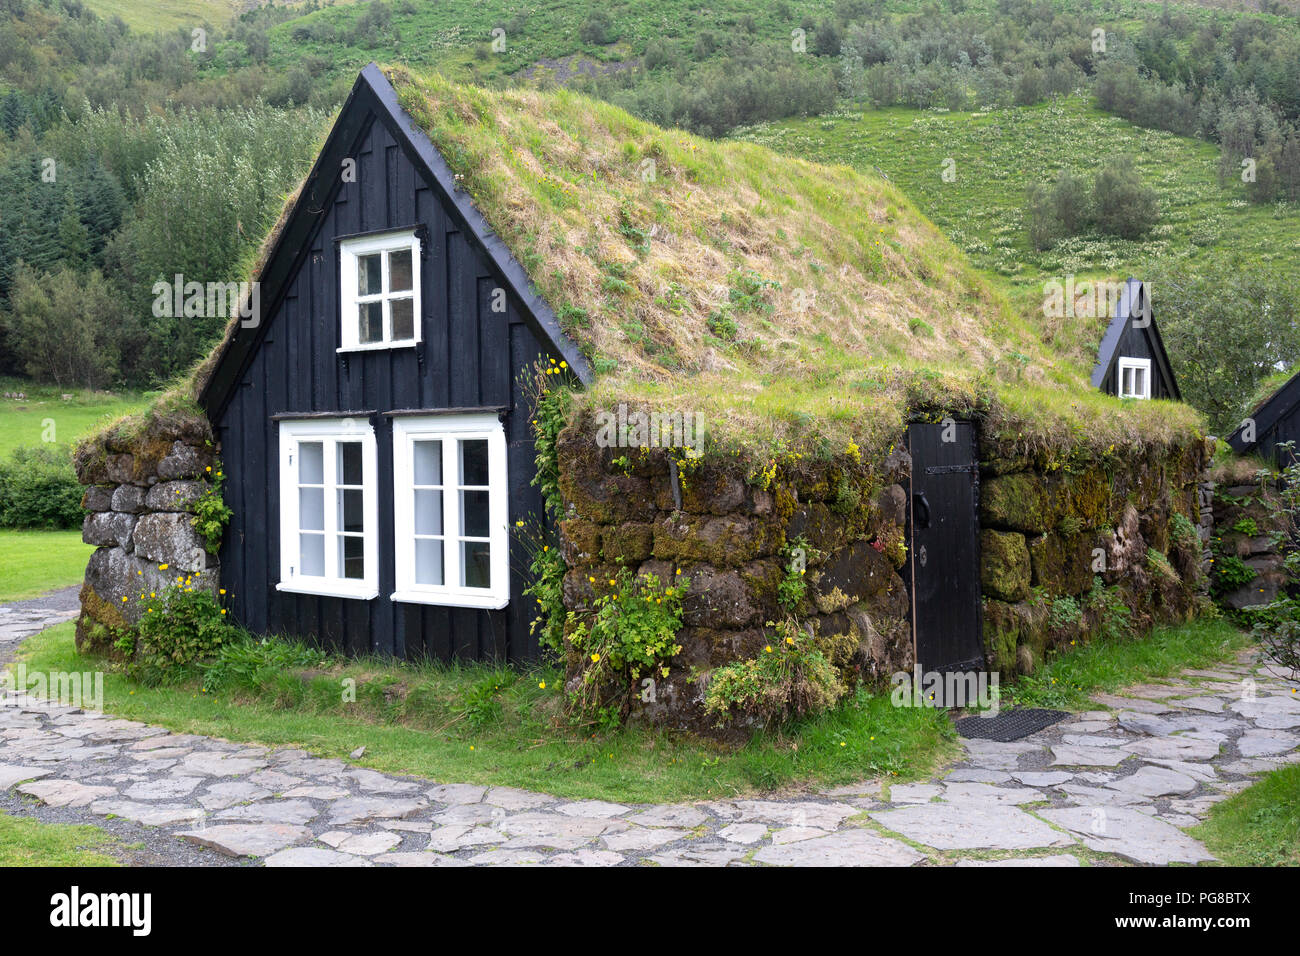 Buildings at Skogar Museum in Iceland. It has a cultural heritage collection of 15,000 regional artifacts in 6 historical buildings and 3 museums. Stock Photo